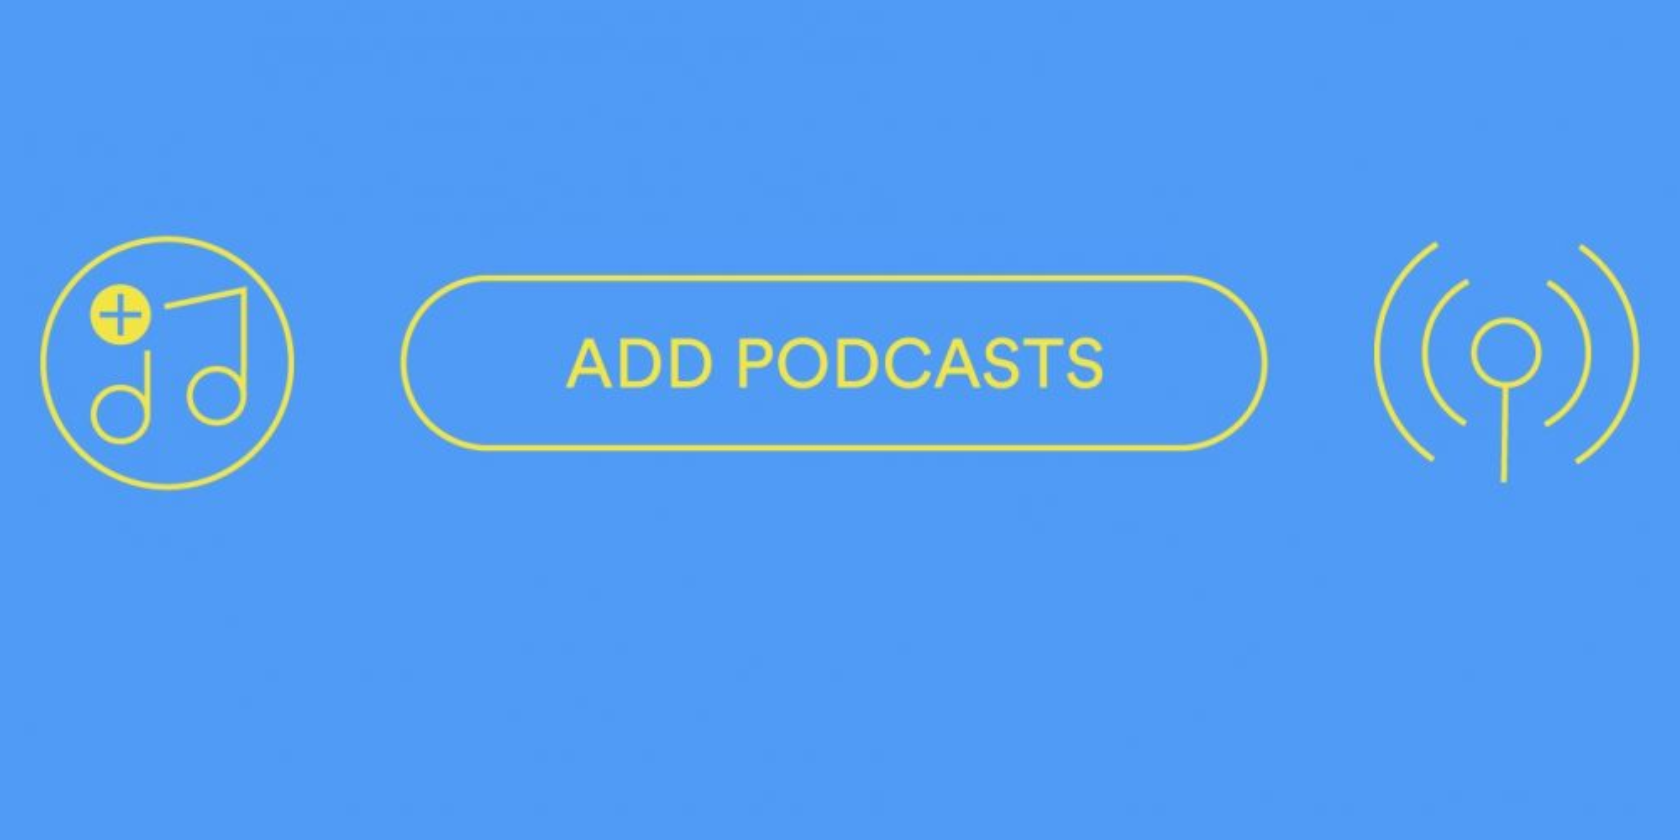 You Can Now Add Podcasts to Spotify Playlists